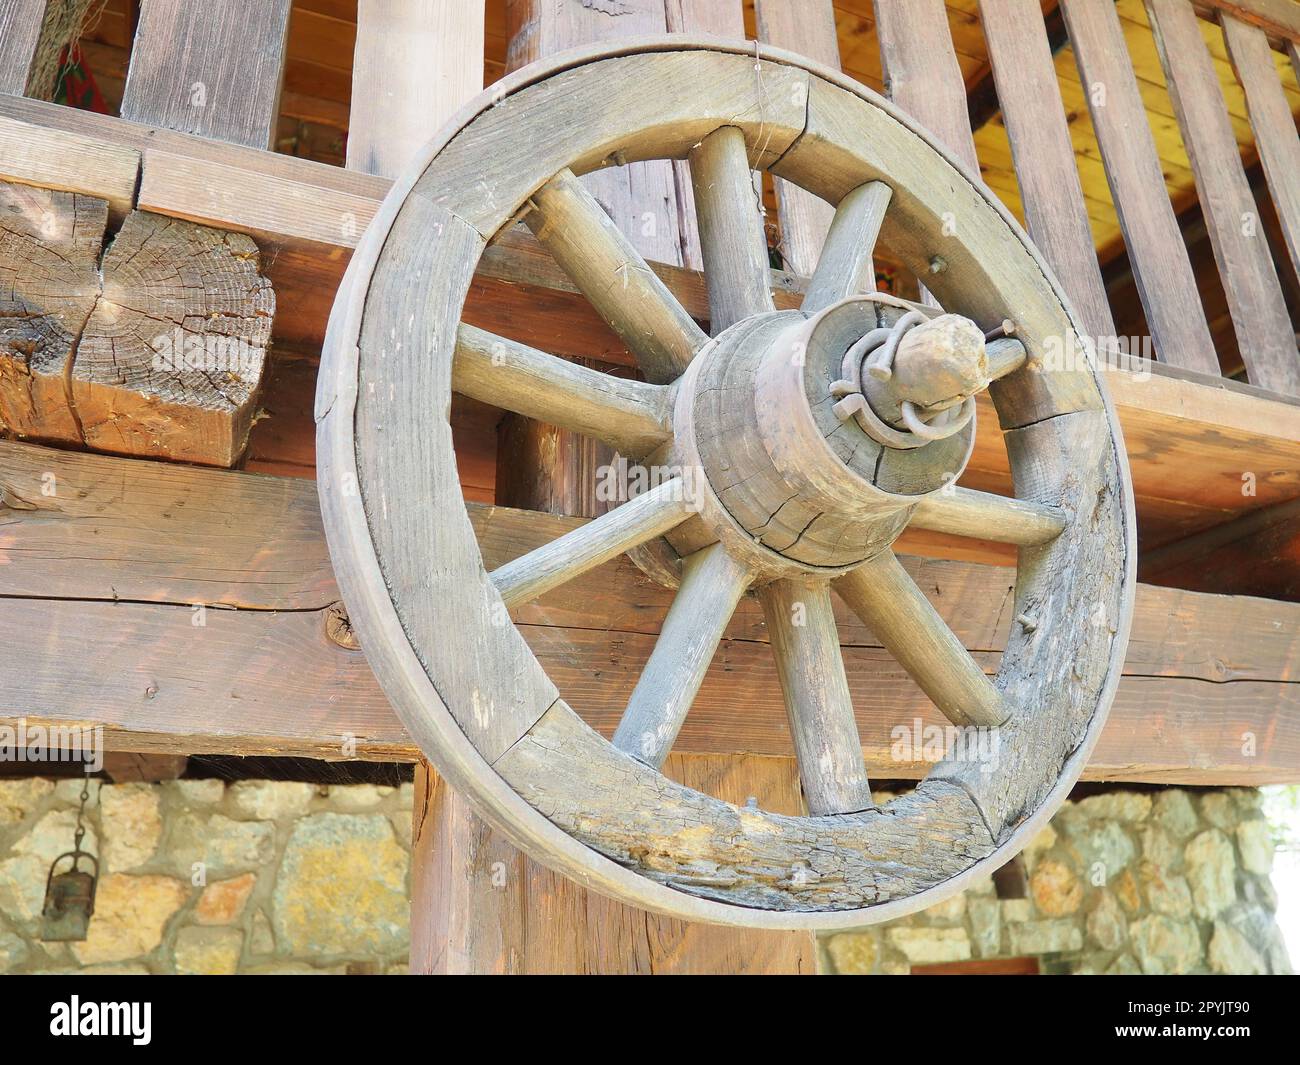 Wooden wheel from a cart. Decorative wheels for decorating lawns, exteriors and rustic interiors. A round homemade wheel hangs on the wall. Retro or vintage style. Life in the countryside Stock Photo